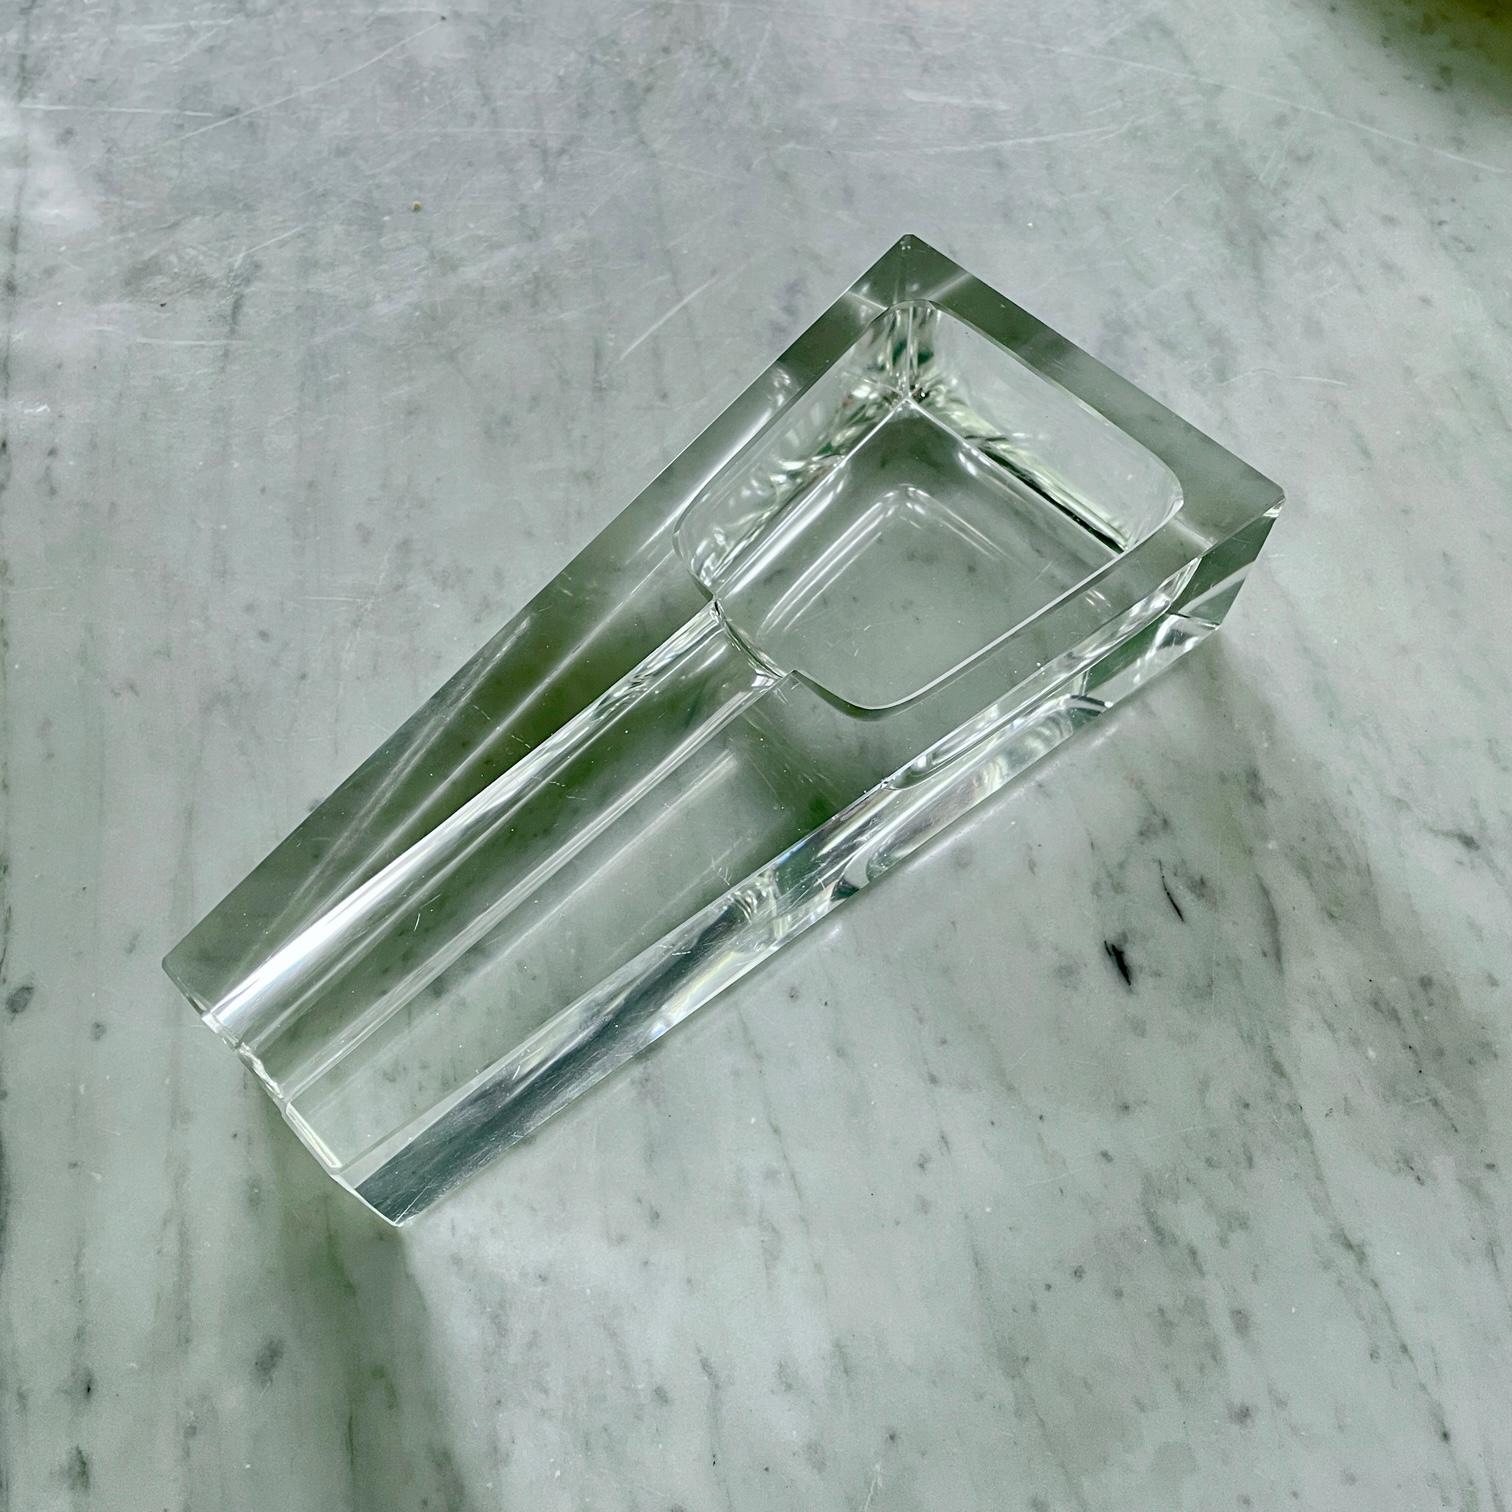 Wonderful geometric simplicity, heavy 1970s cut and polished crystal design, clear. No makers markings. There is a ridge at end of tube form for cutting cigar end with a round tipped blade, this is something I have not seen in previous ashtrays.

L: